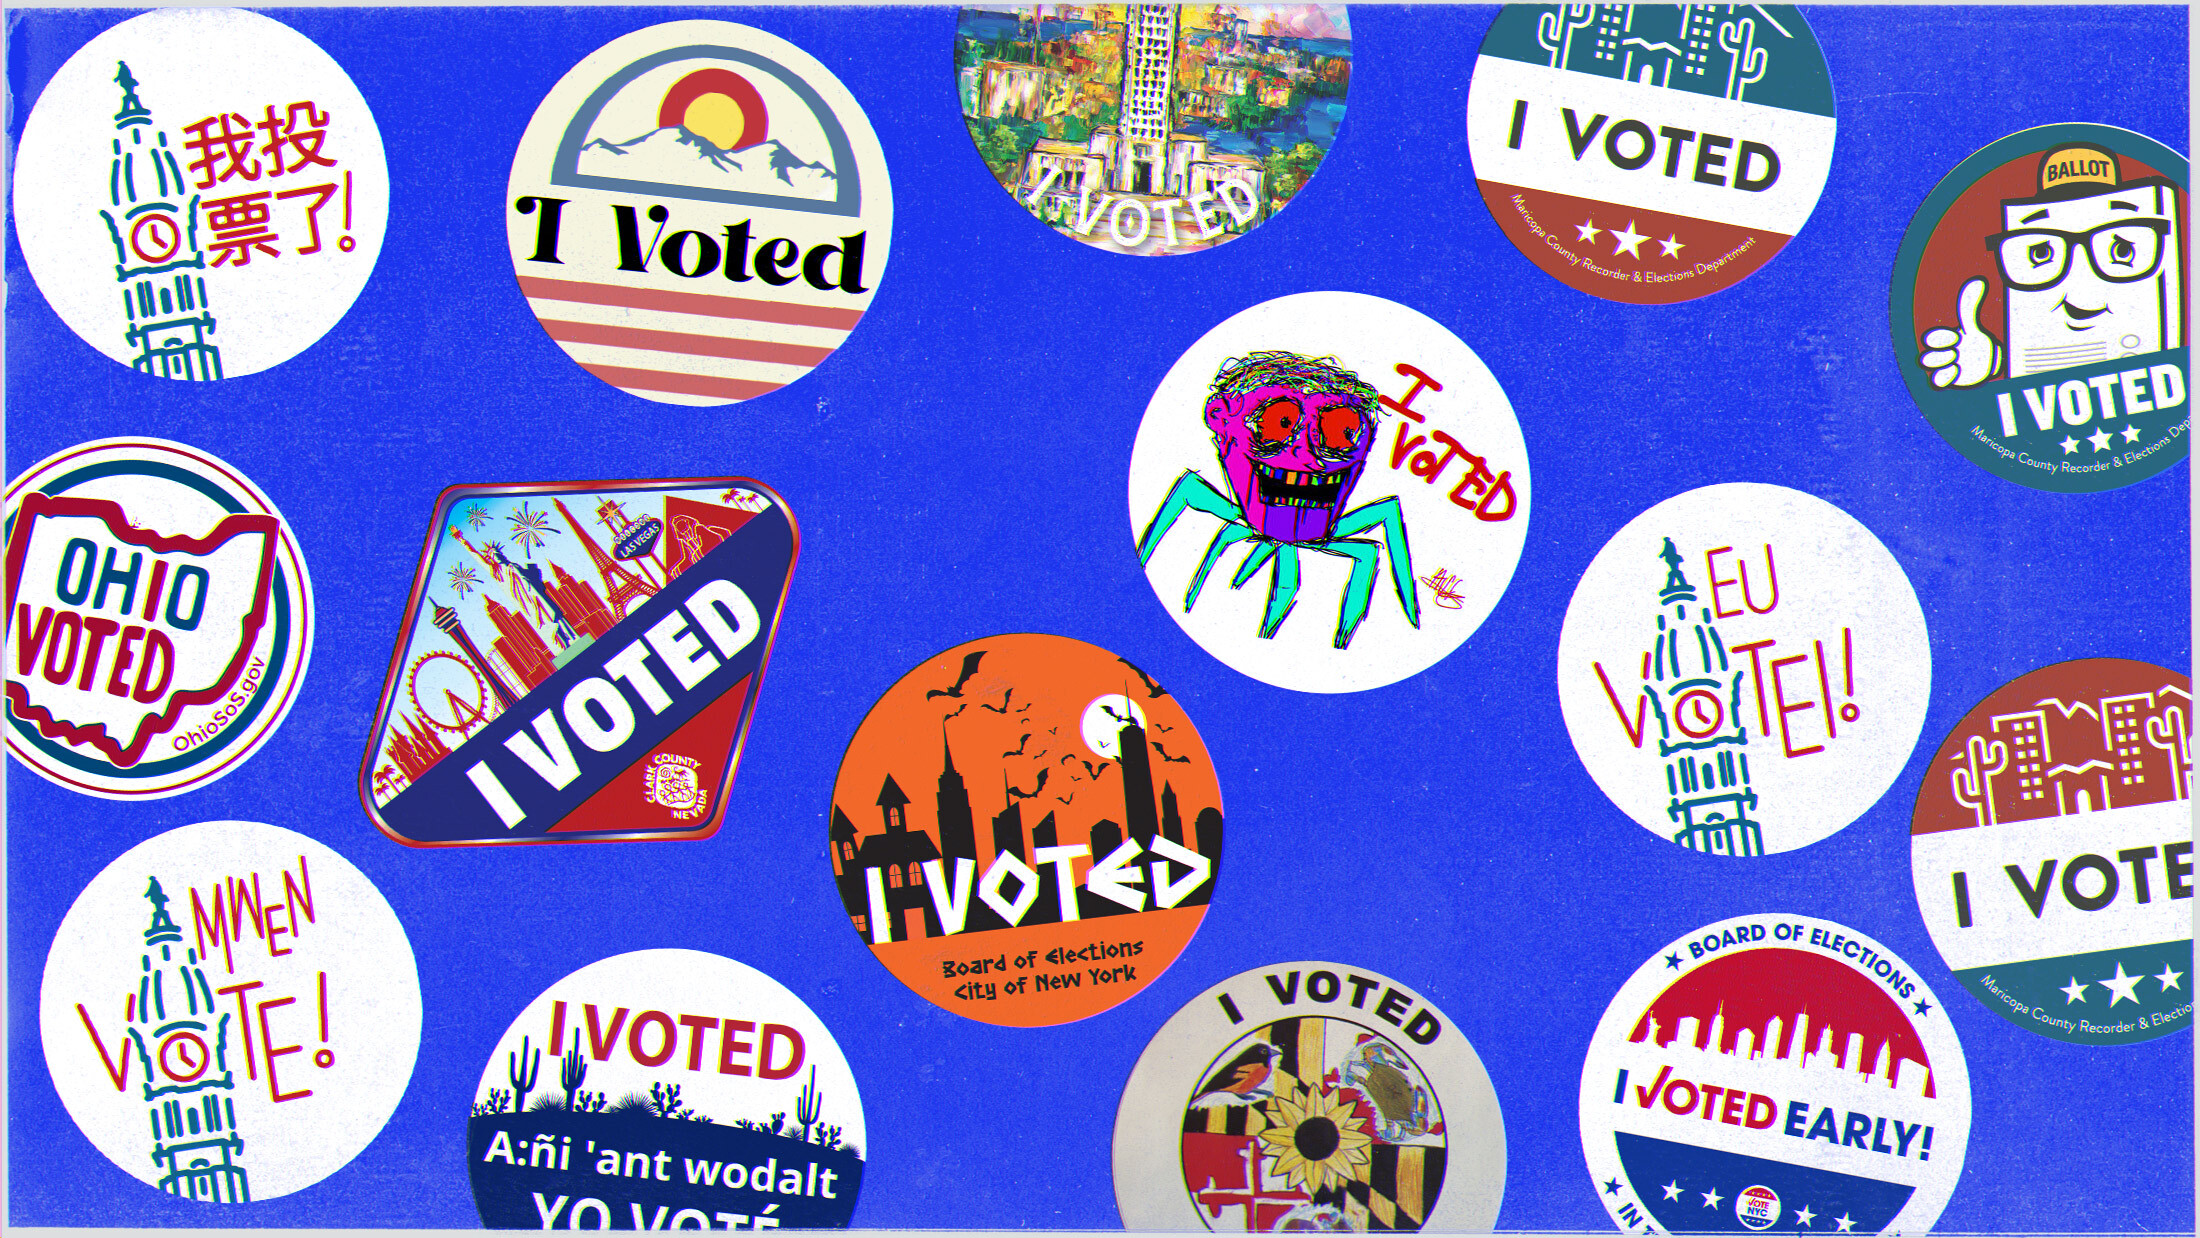 That Viral 'I Voted' Sticker Is the Kind of Election Craziness We Need -  Bloomberg